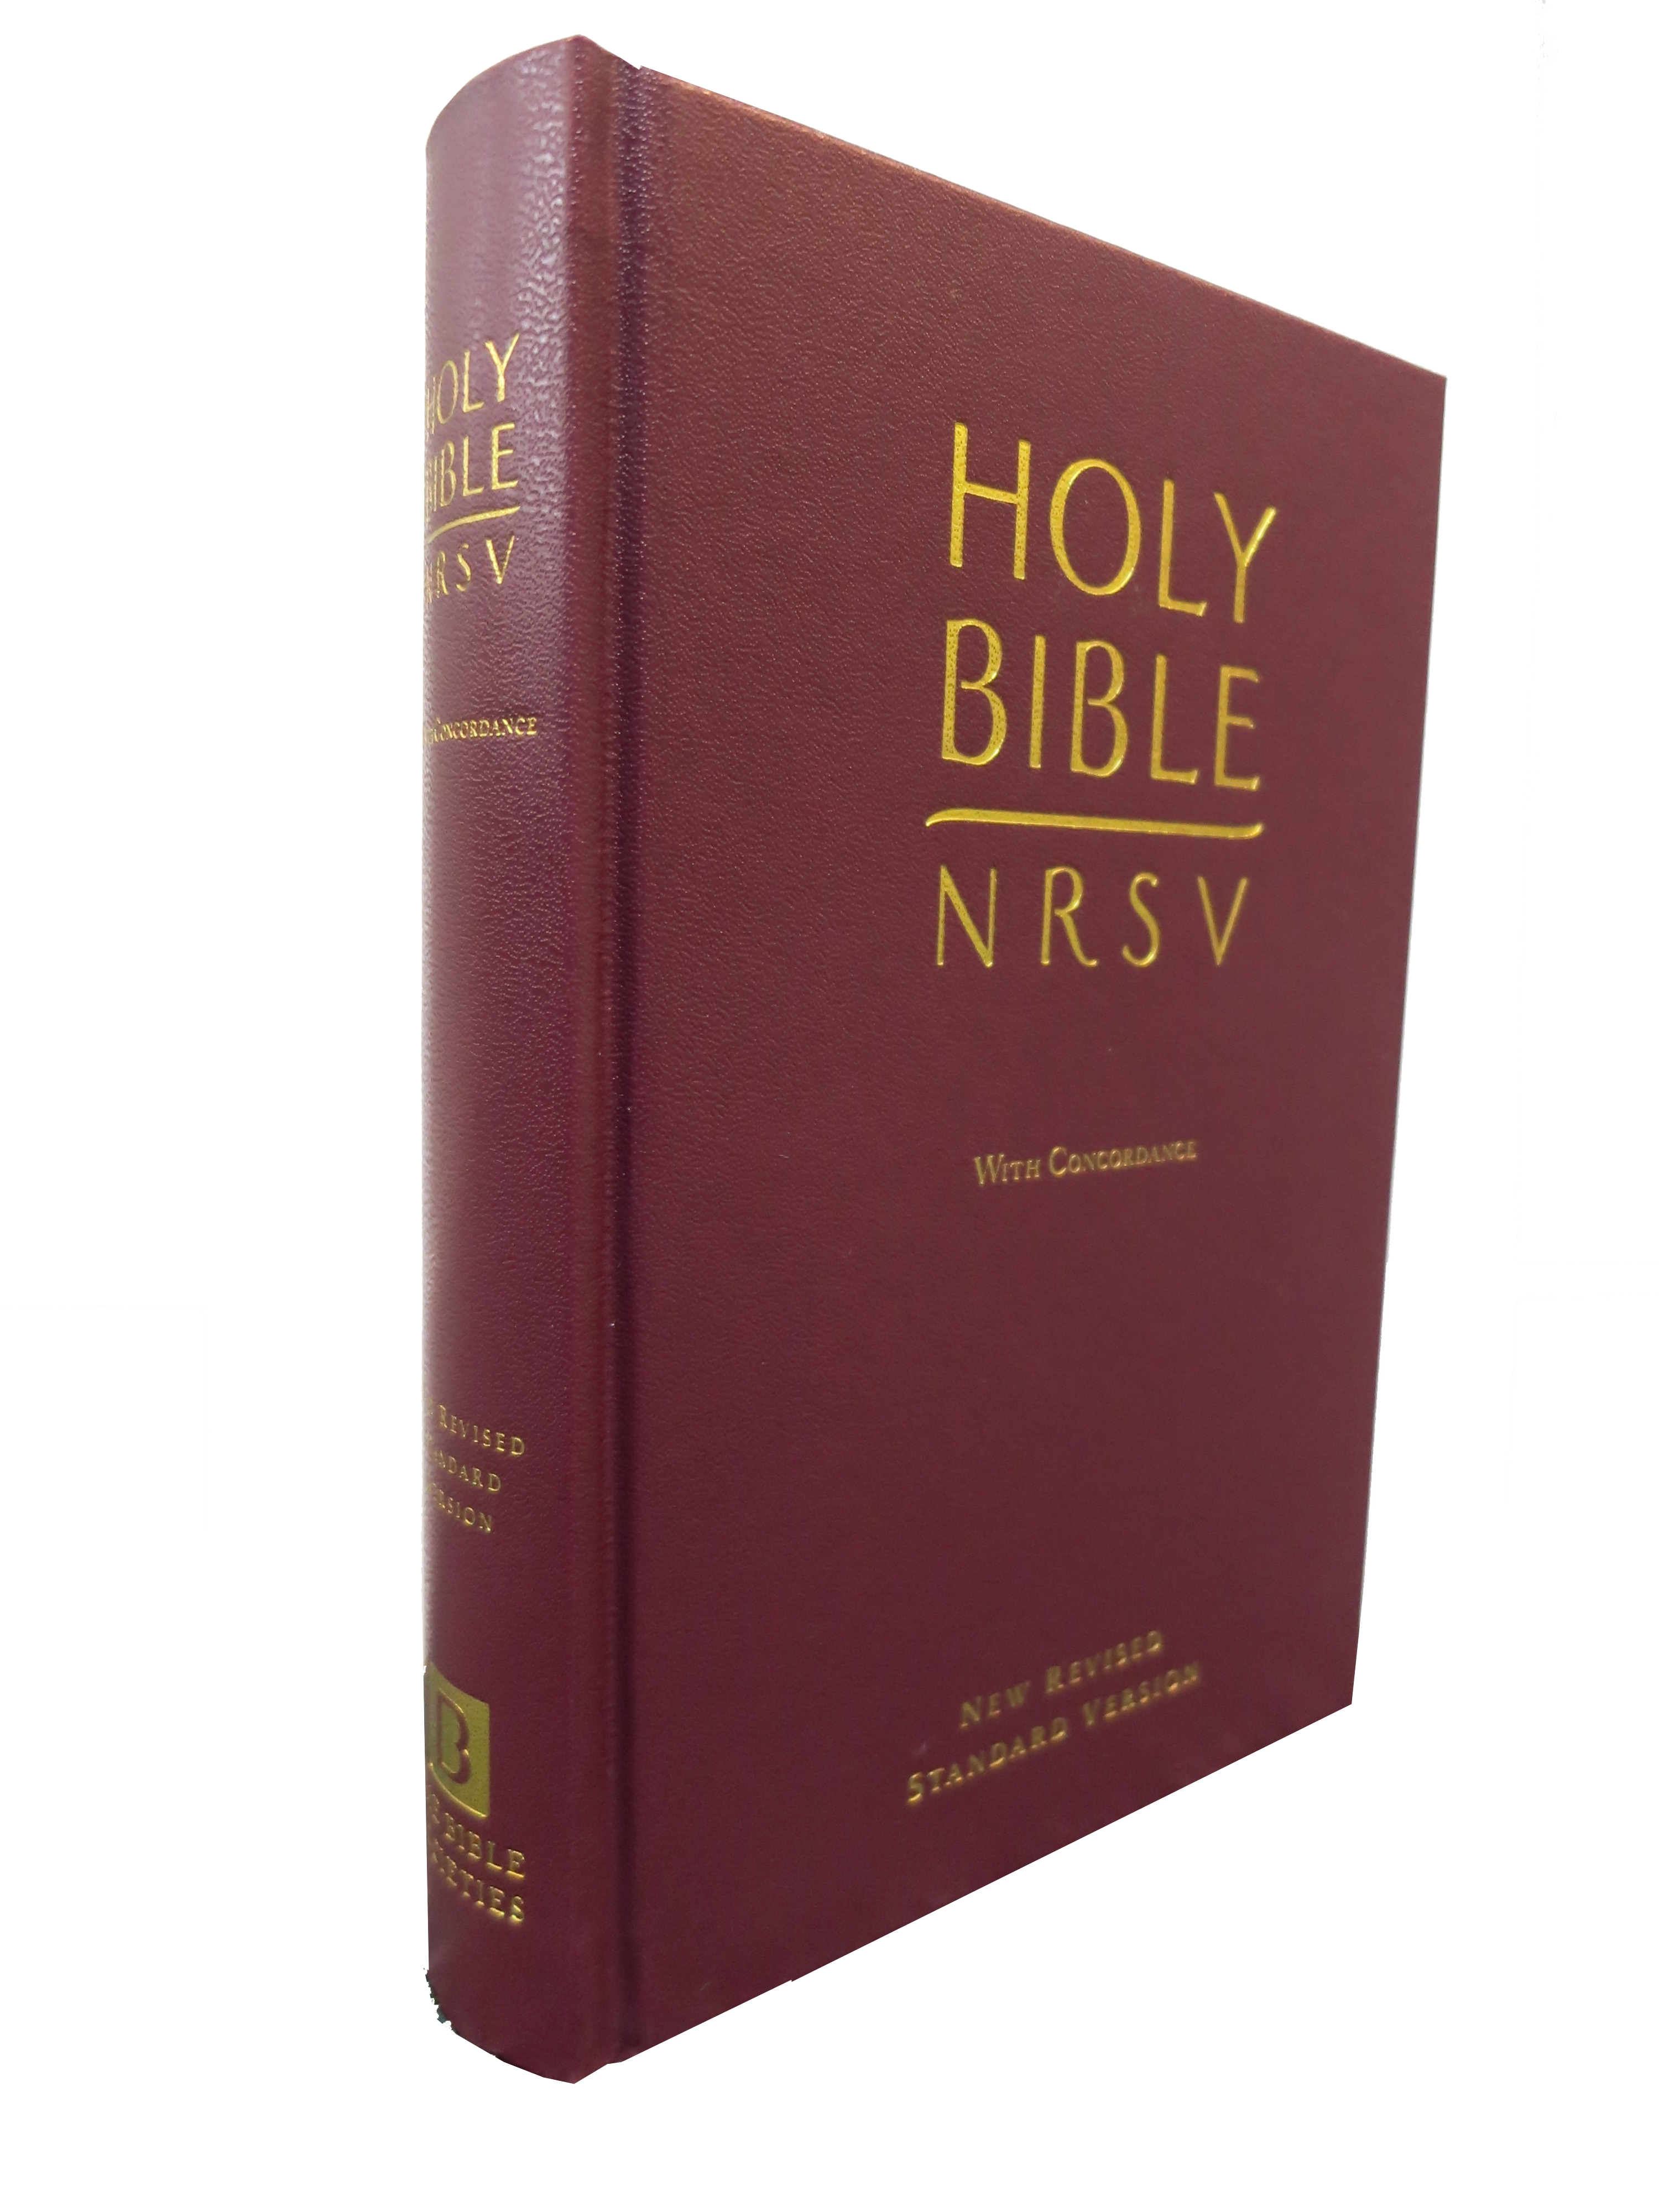 New Revised Standard Version (NRSV) with Concordance